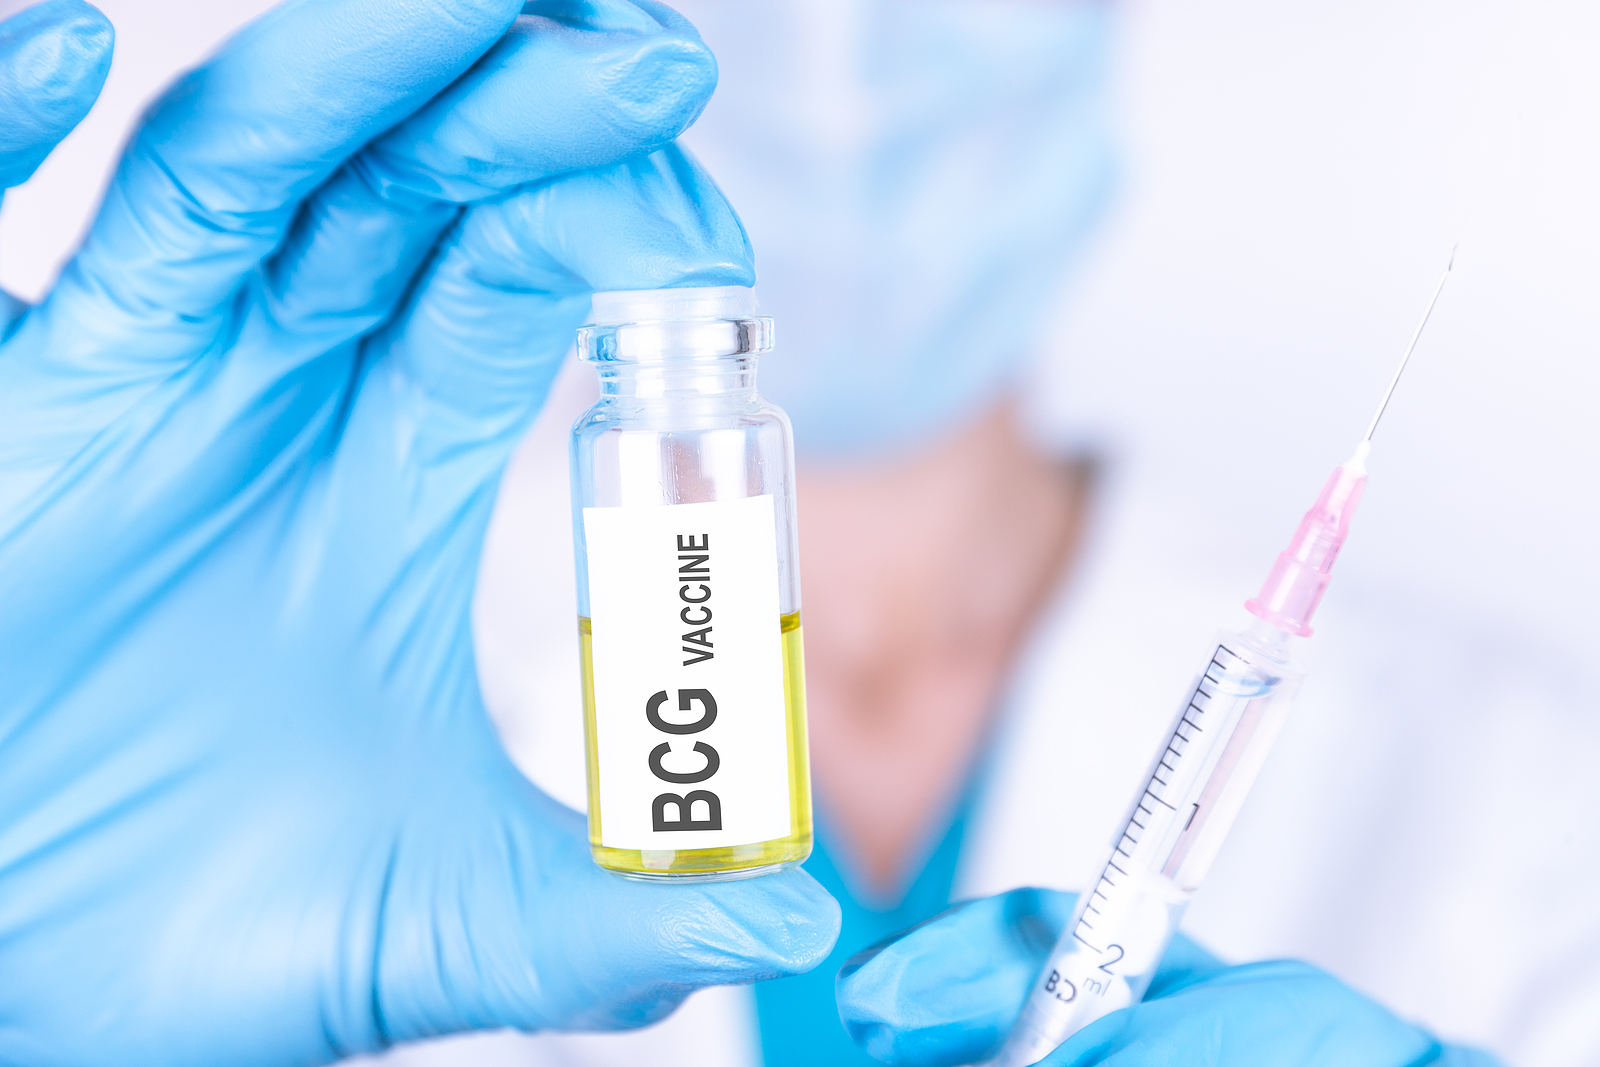 Countries With Mandatory Policies To BCG Vaccine Register Fewer Coronavirus Deaths